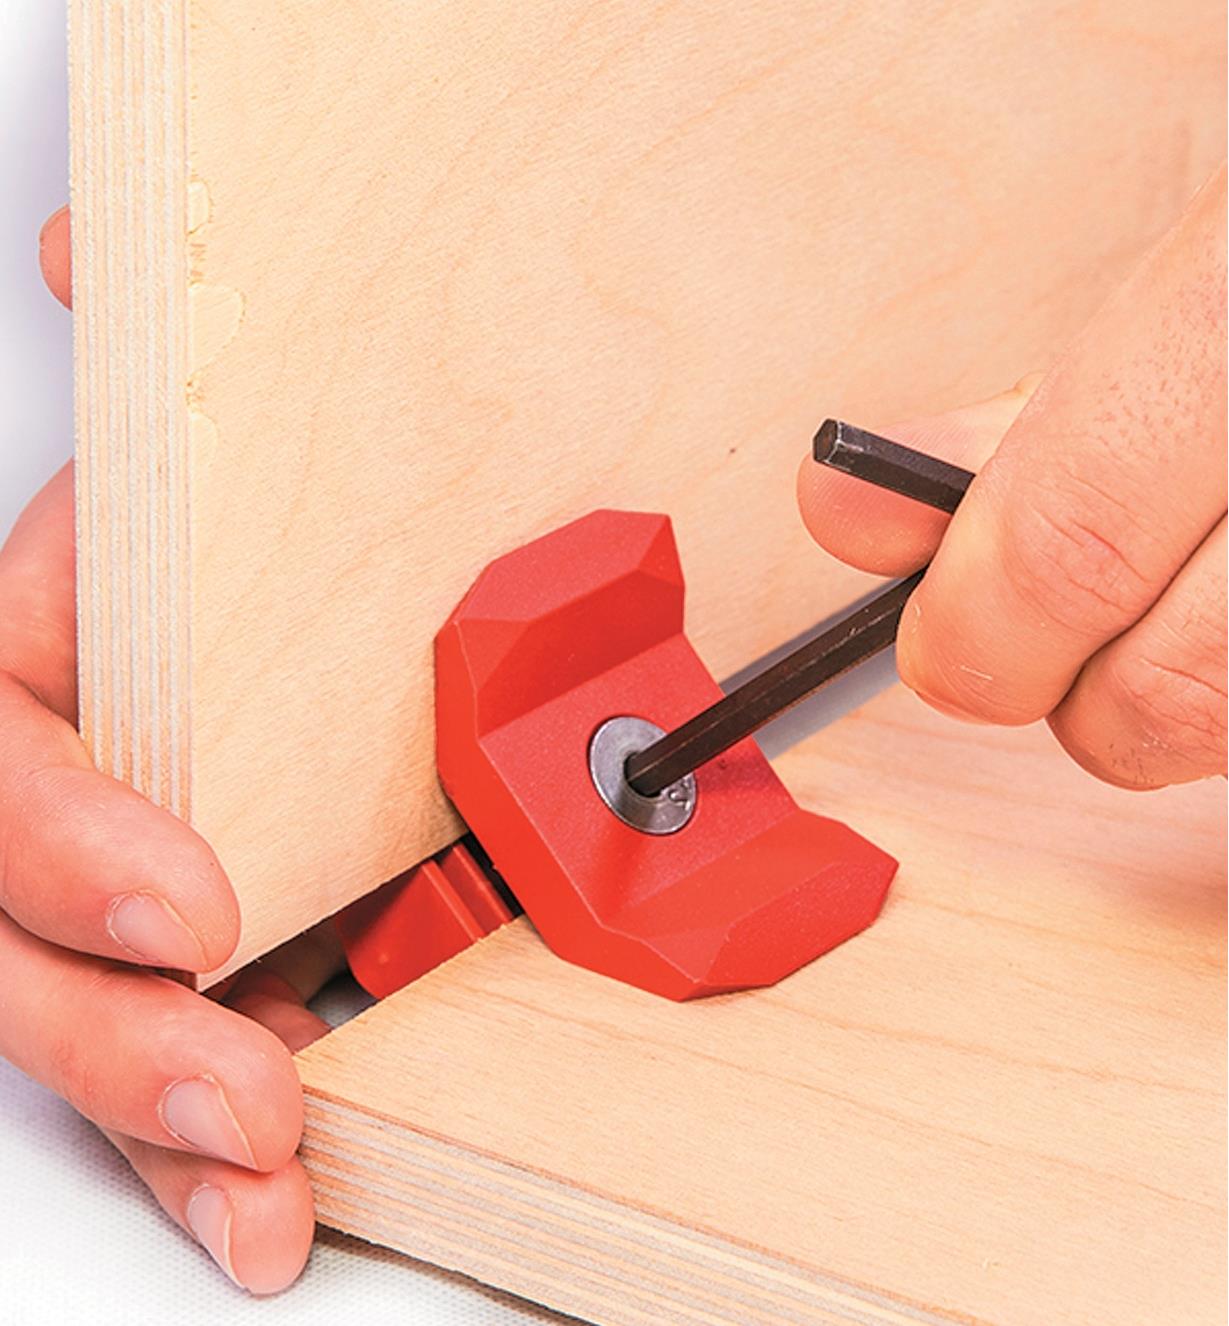 Tightening a 90° Red Playwood Connector with a hex key